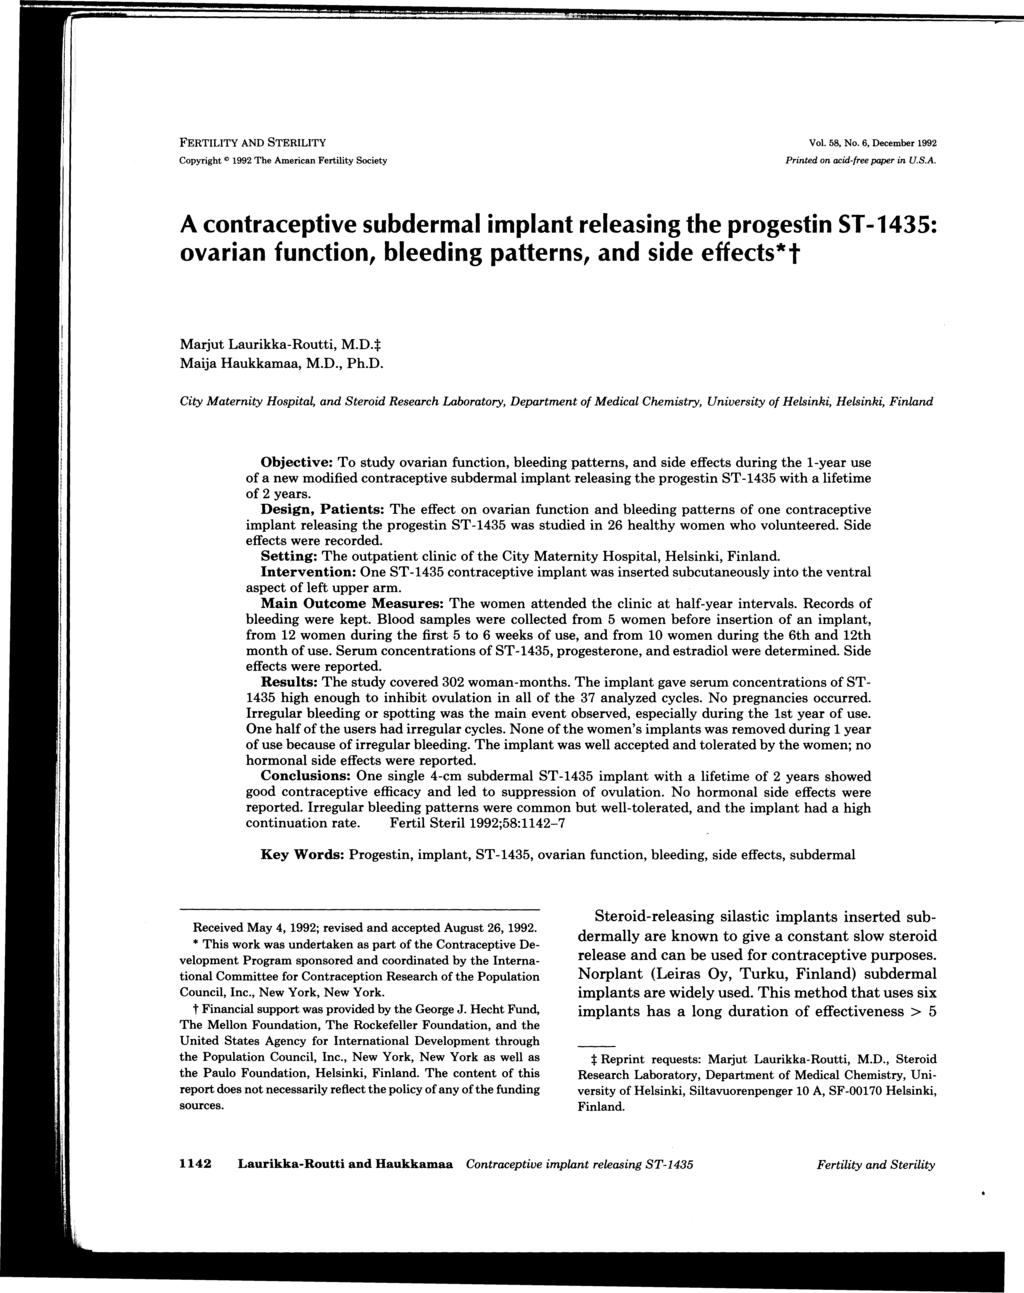 FERTILITY AND STERILITY Vol. 58, No.6, December 1992 Copyright CI 1992 The American Fertility Society Printed on ocid-free paper in U.S.A. A contraceptive subdermal implant releasing the progestin S1-1435: ovarian function, bleeding patterns, and side effects*t Marjut Laurikka-Routti, M.